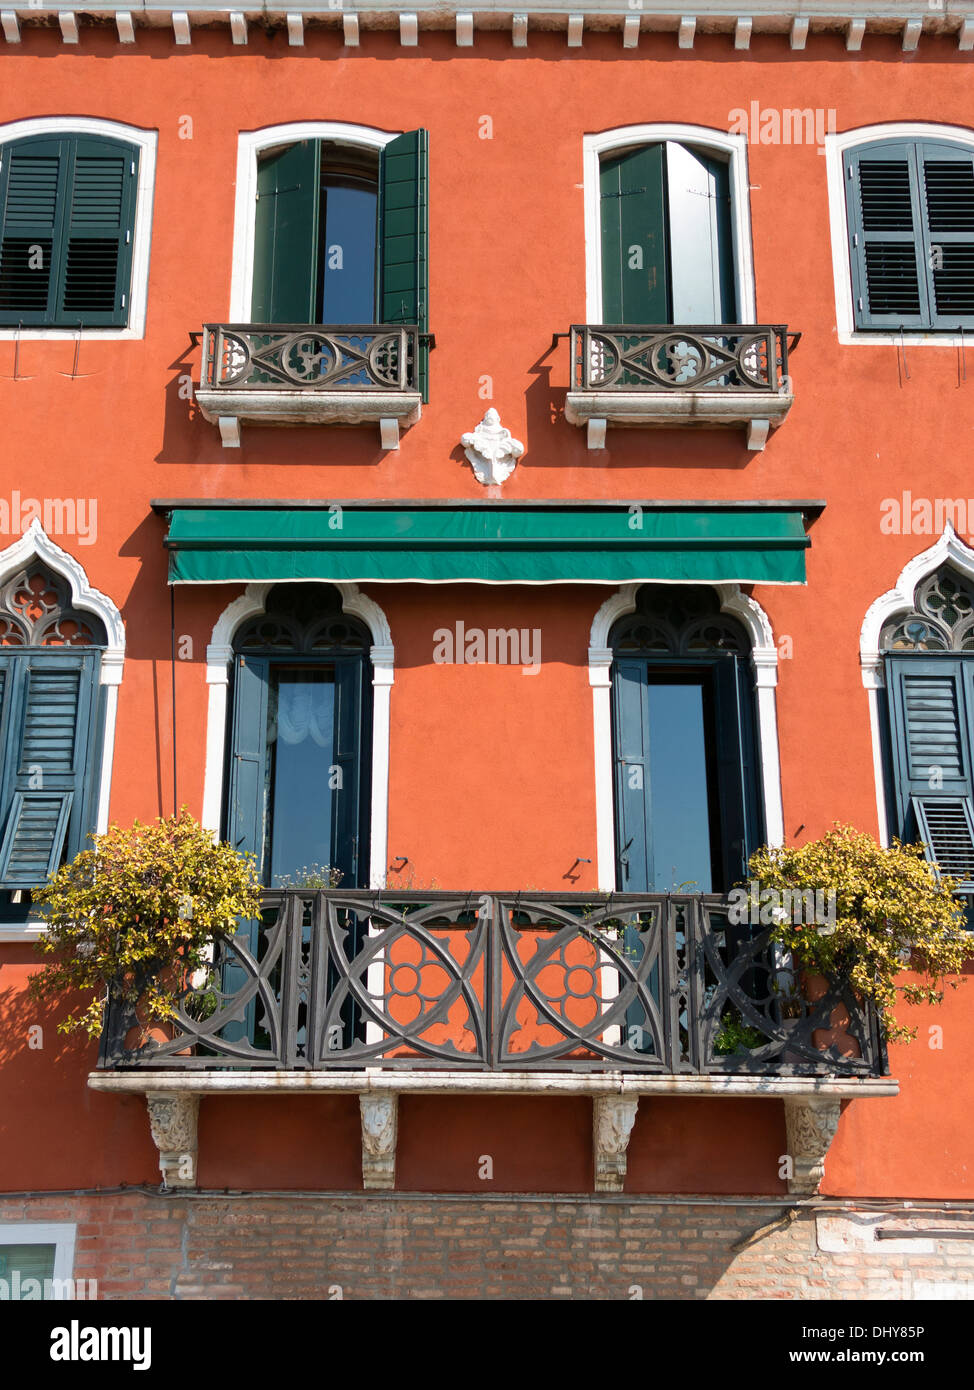 Terracotta orange red rendered Venetian house facade with ornate balconies and green window shutters, Venice, Italy. Stock Photo